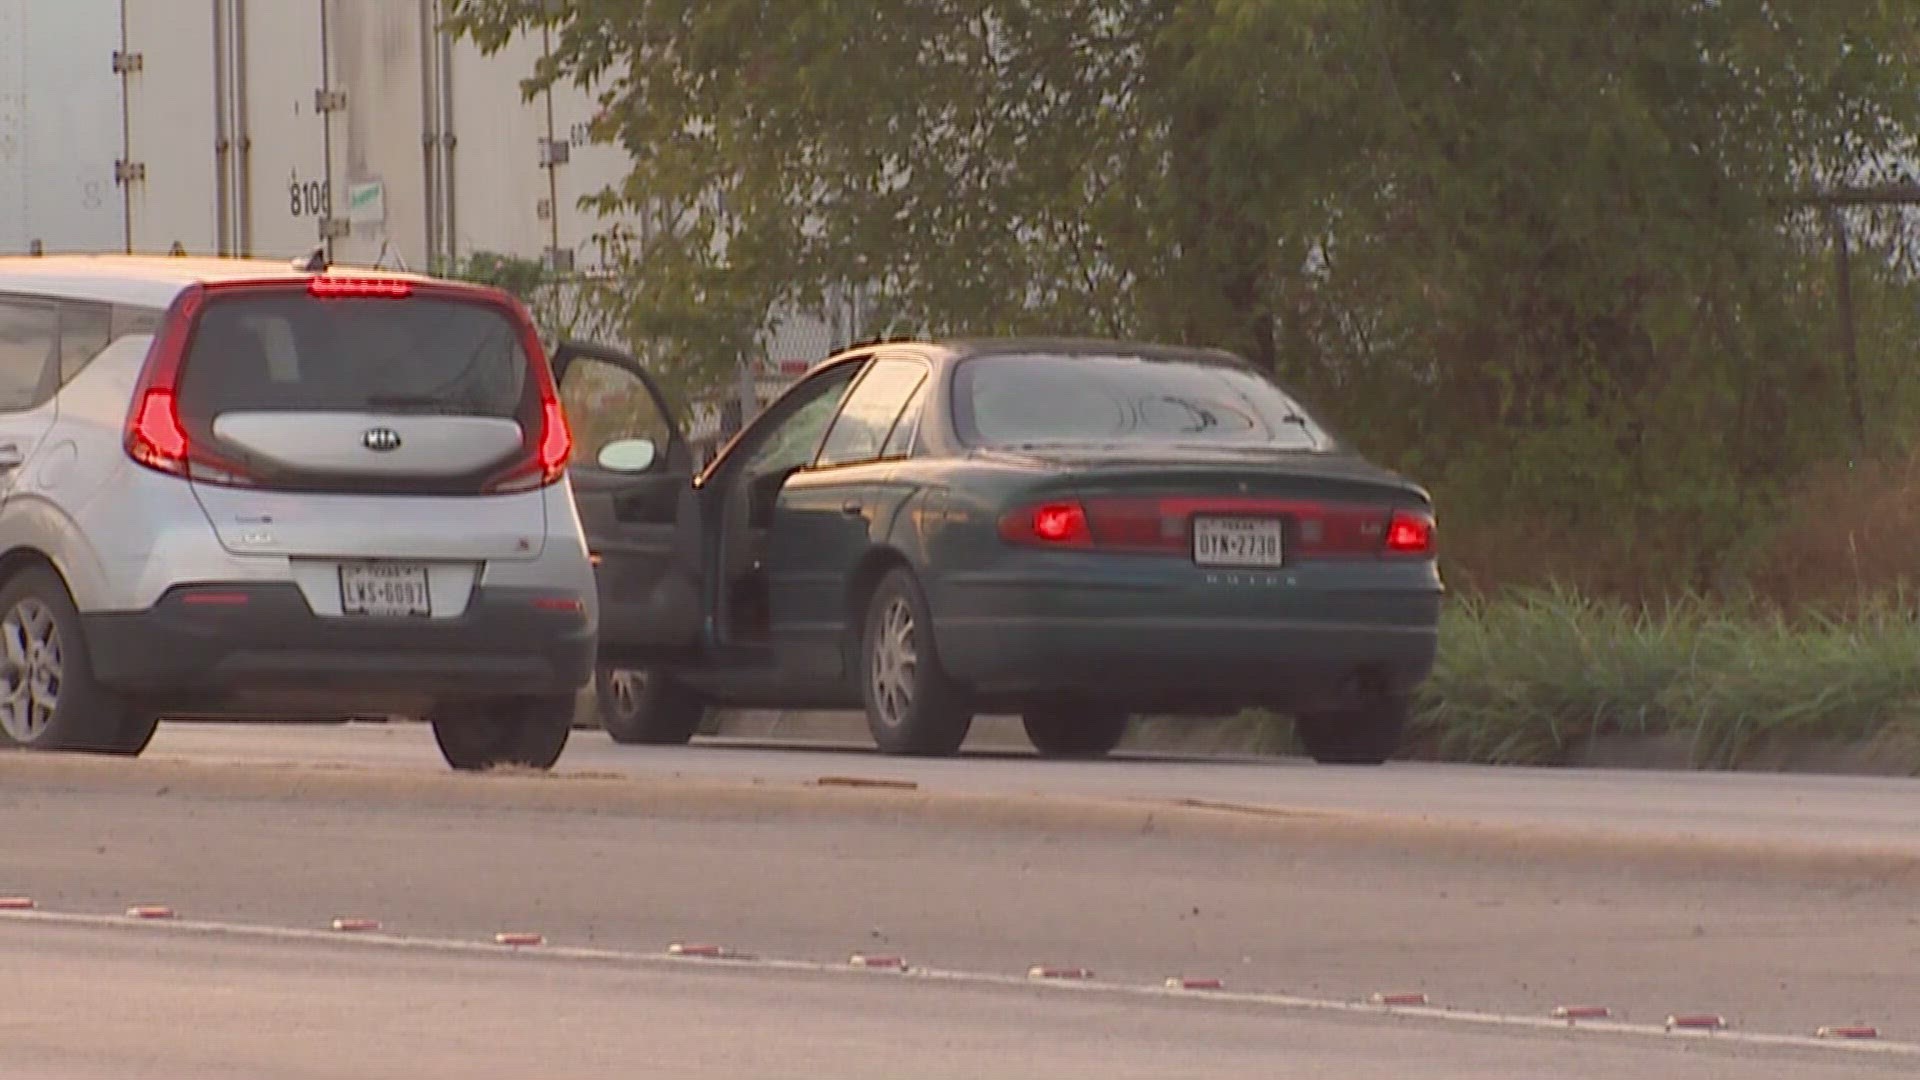 A pedestrian has died after being hit by a car in Dallas.